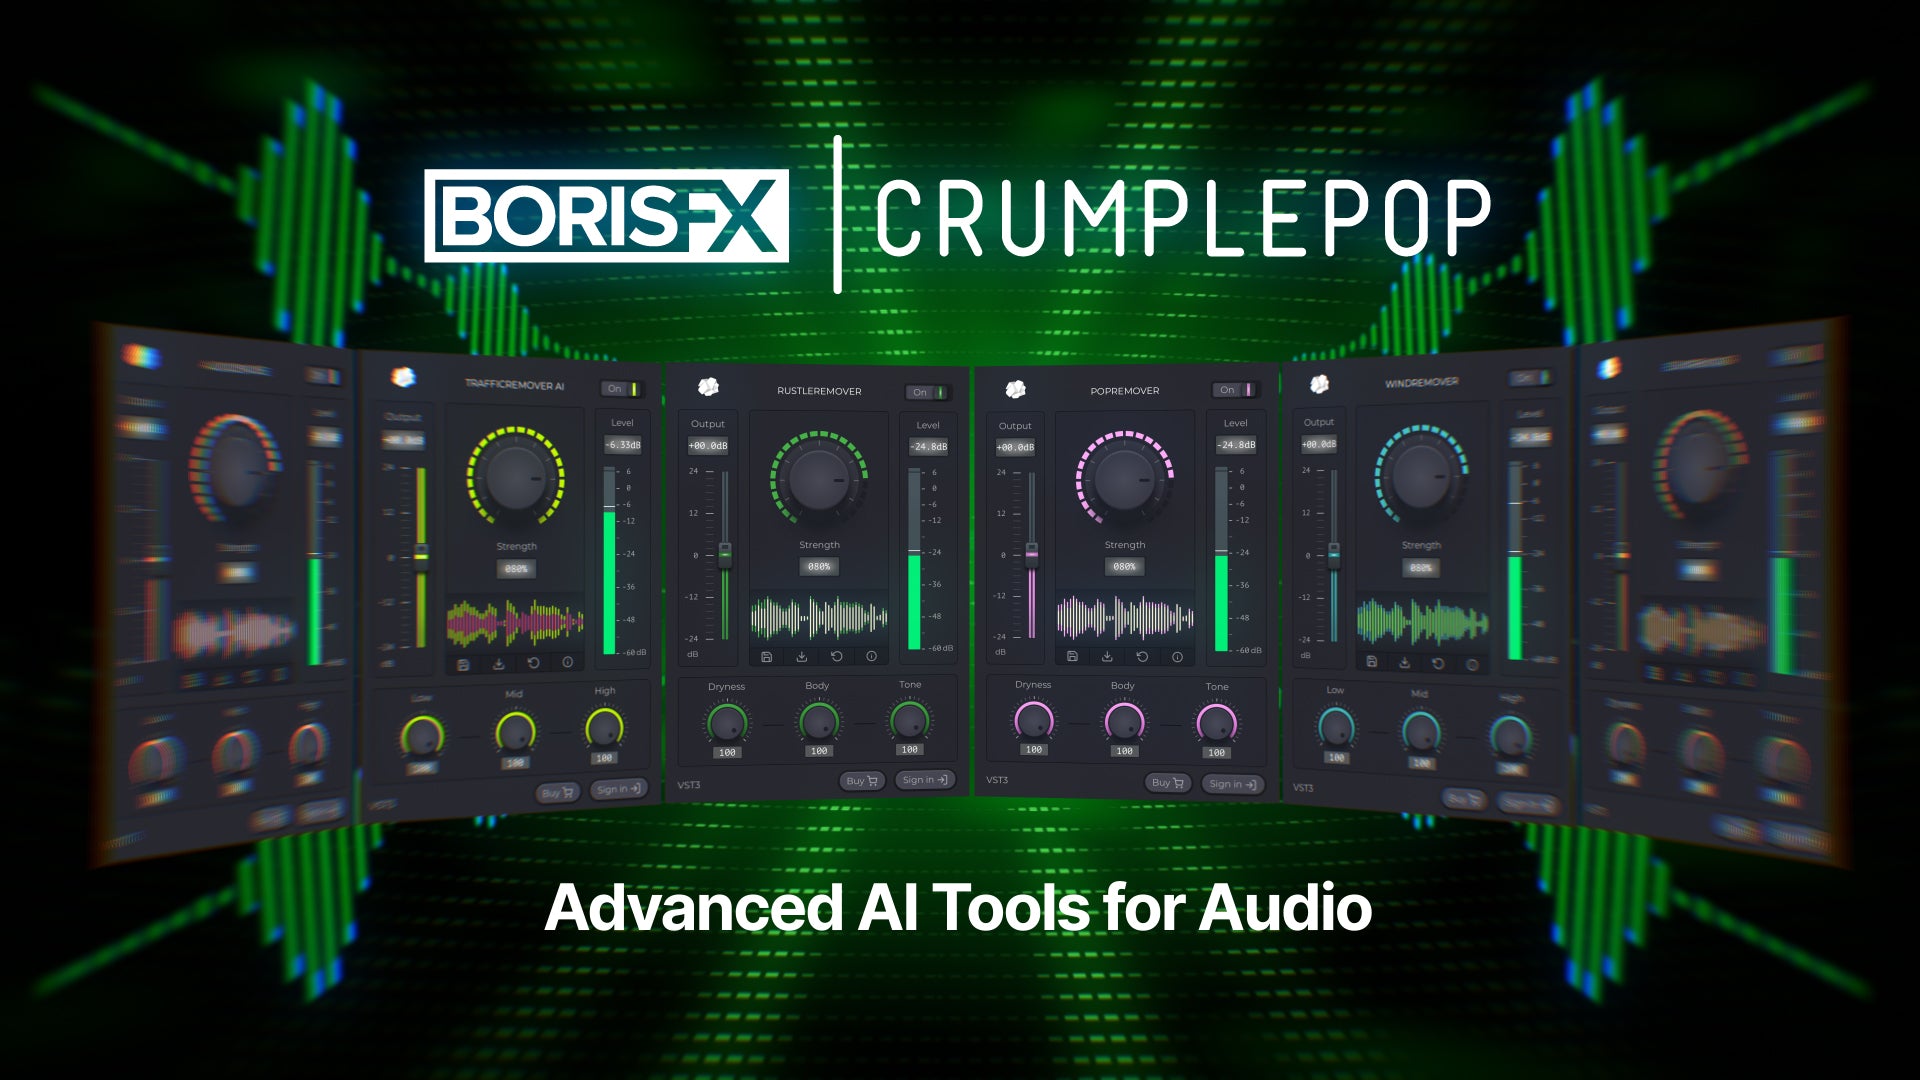 CrumplePop, The Ultimate Solution for Flawless Audio is back in Stock!